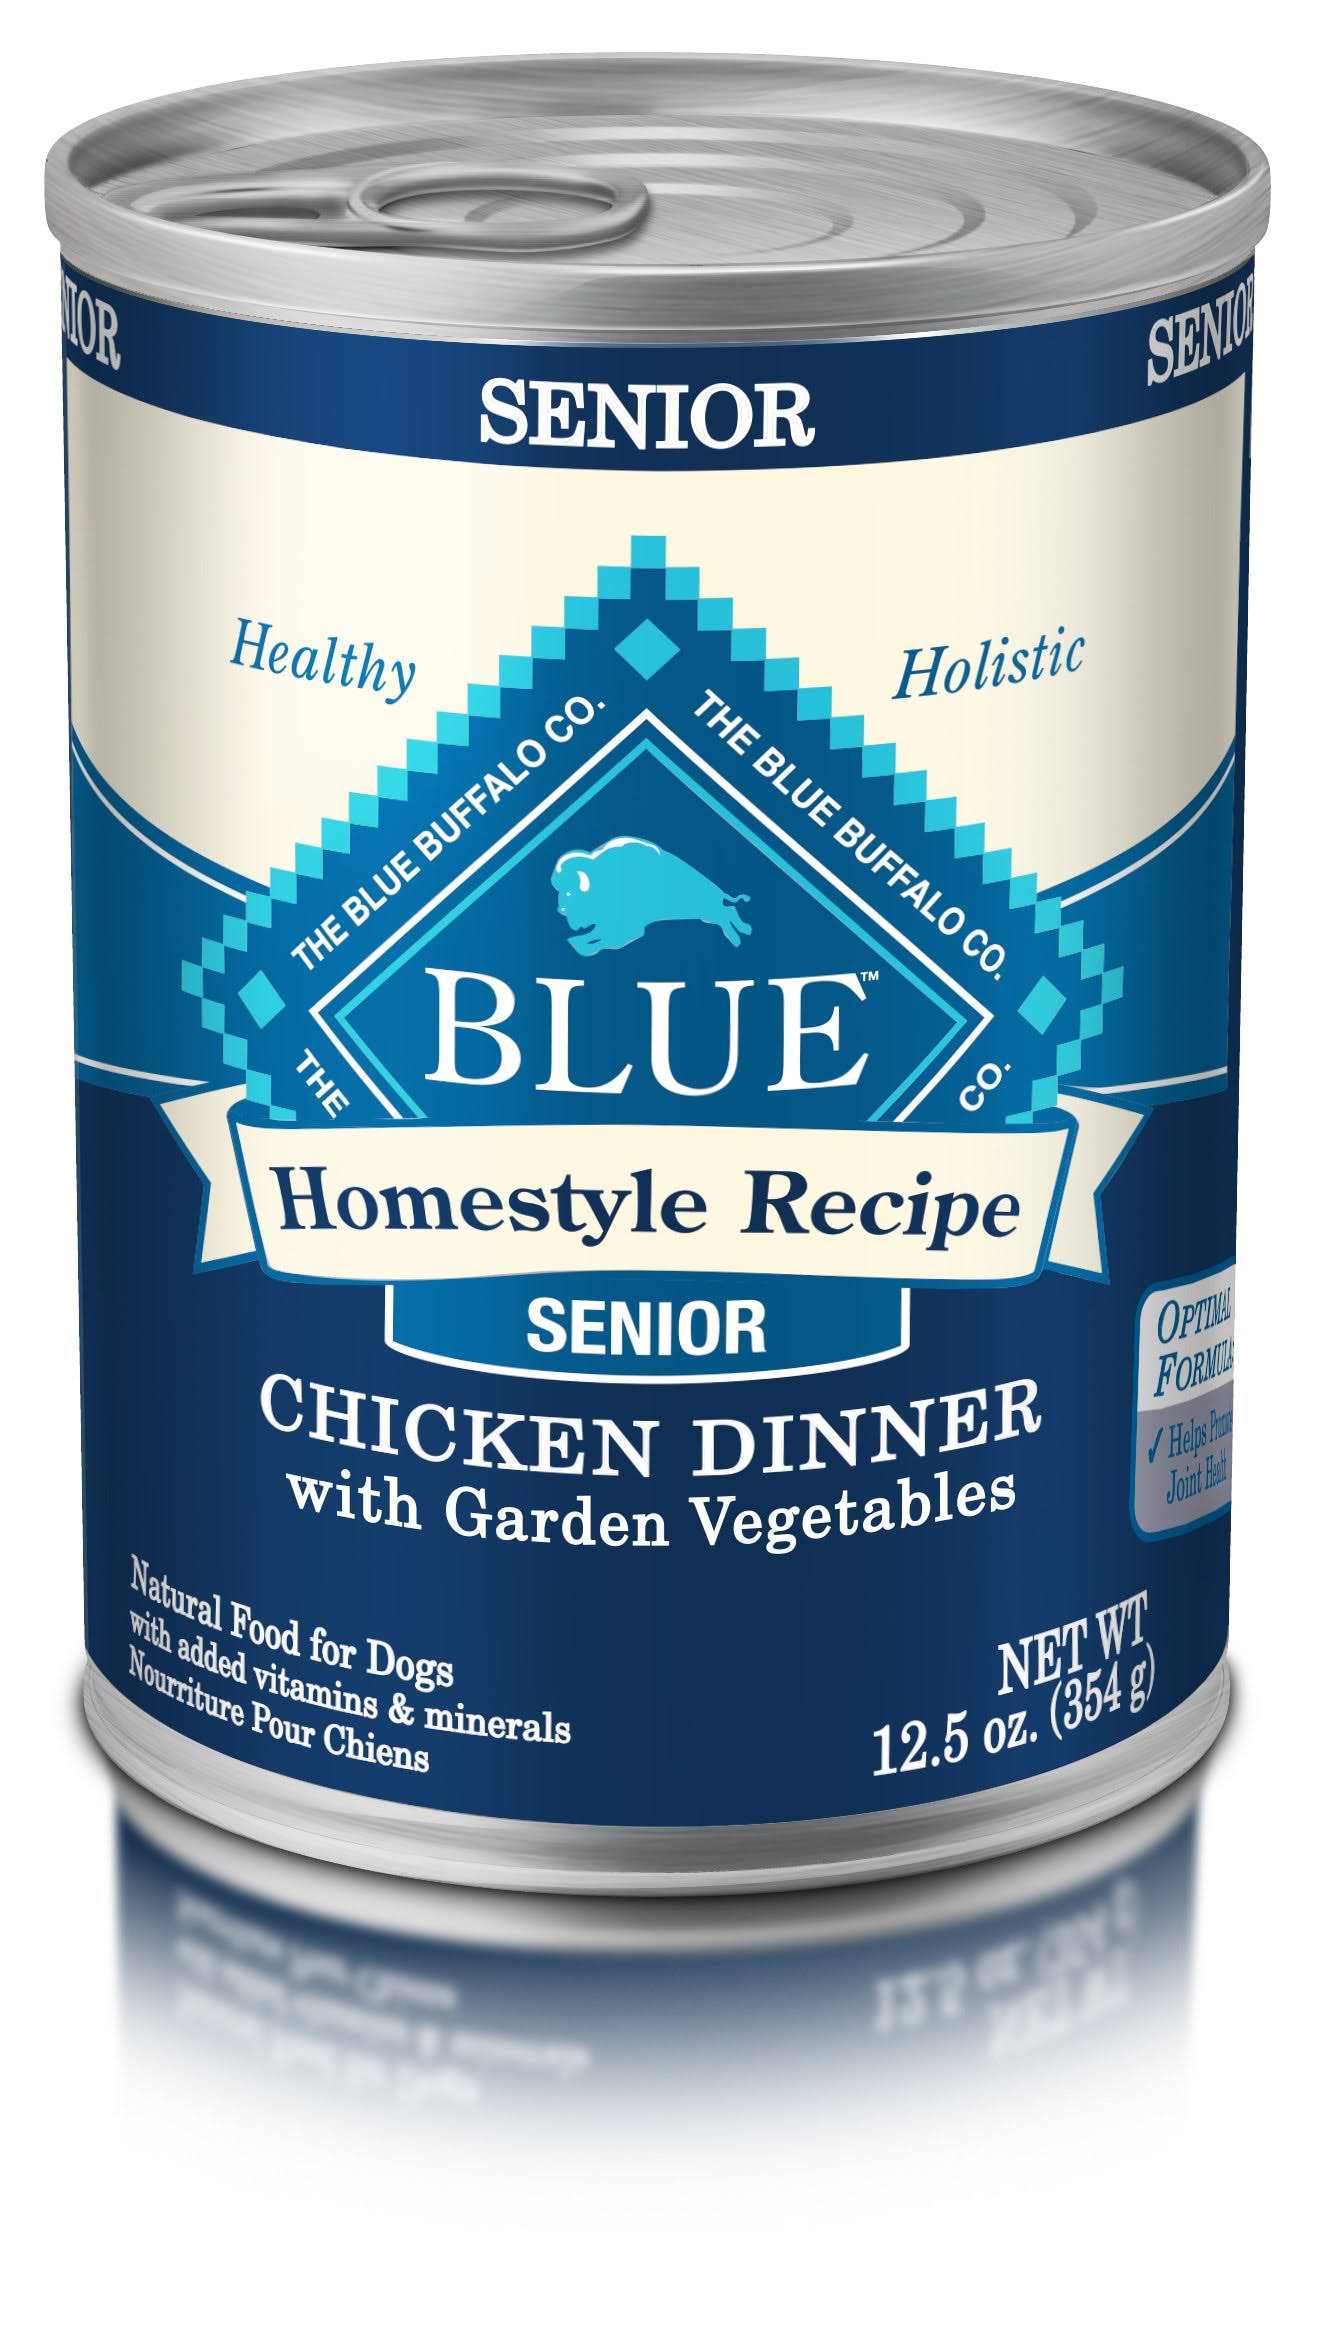 Blue Buffalo Homestyle and Family Favorites Recipes - Sunday Chicken Dinner